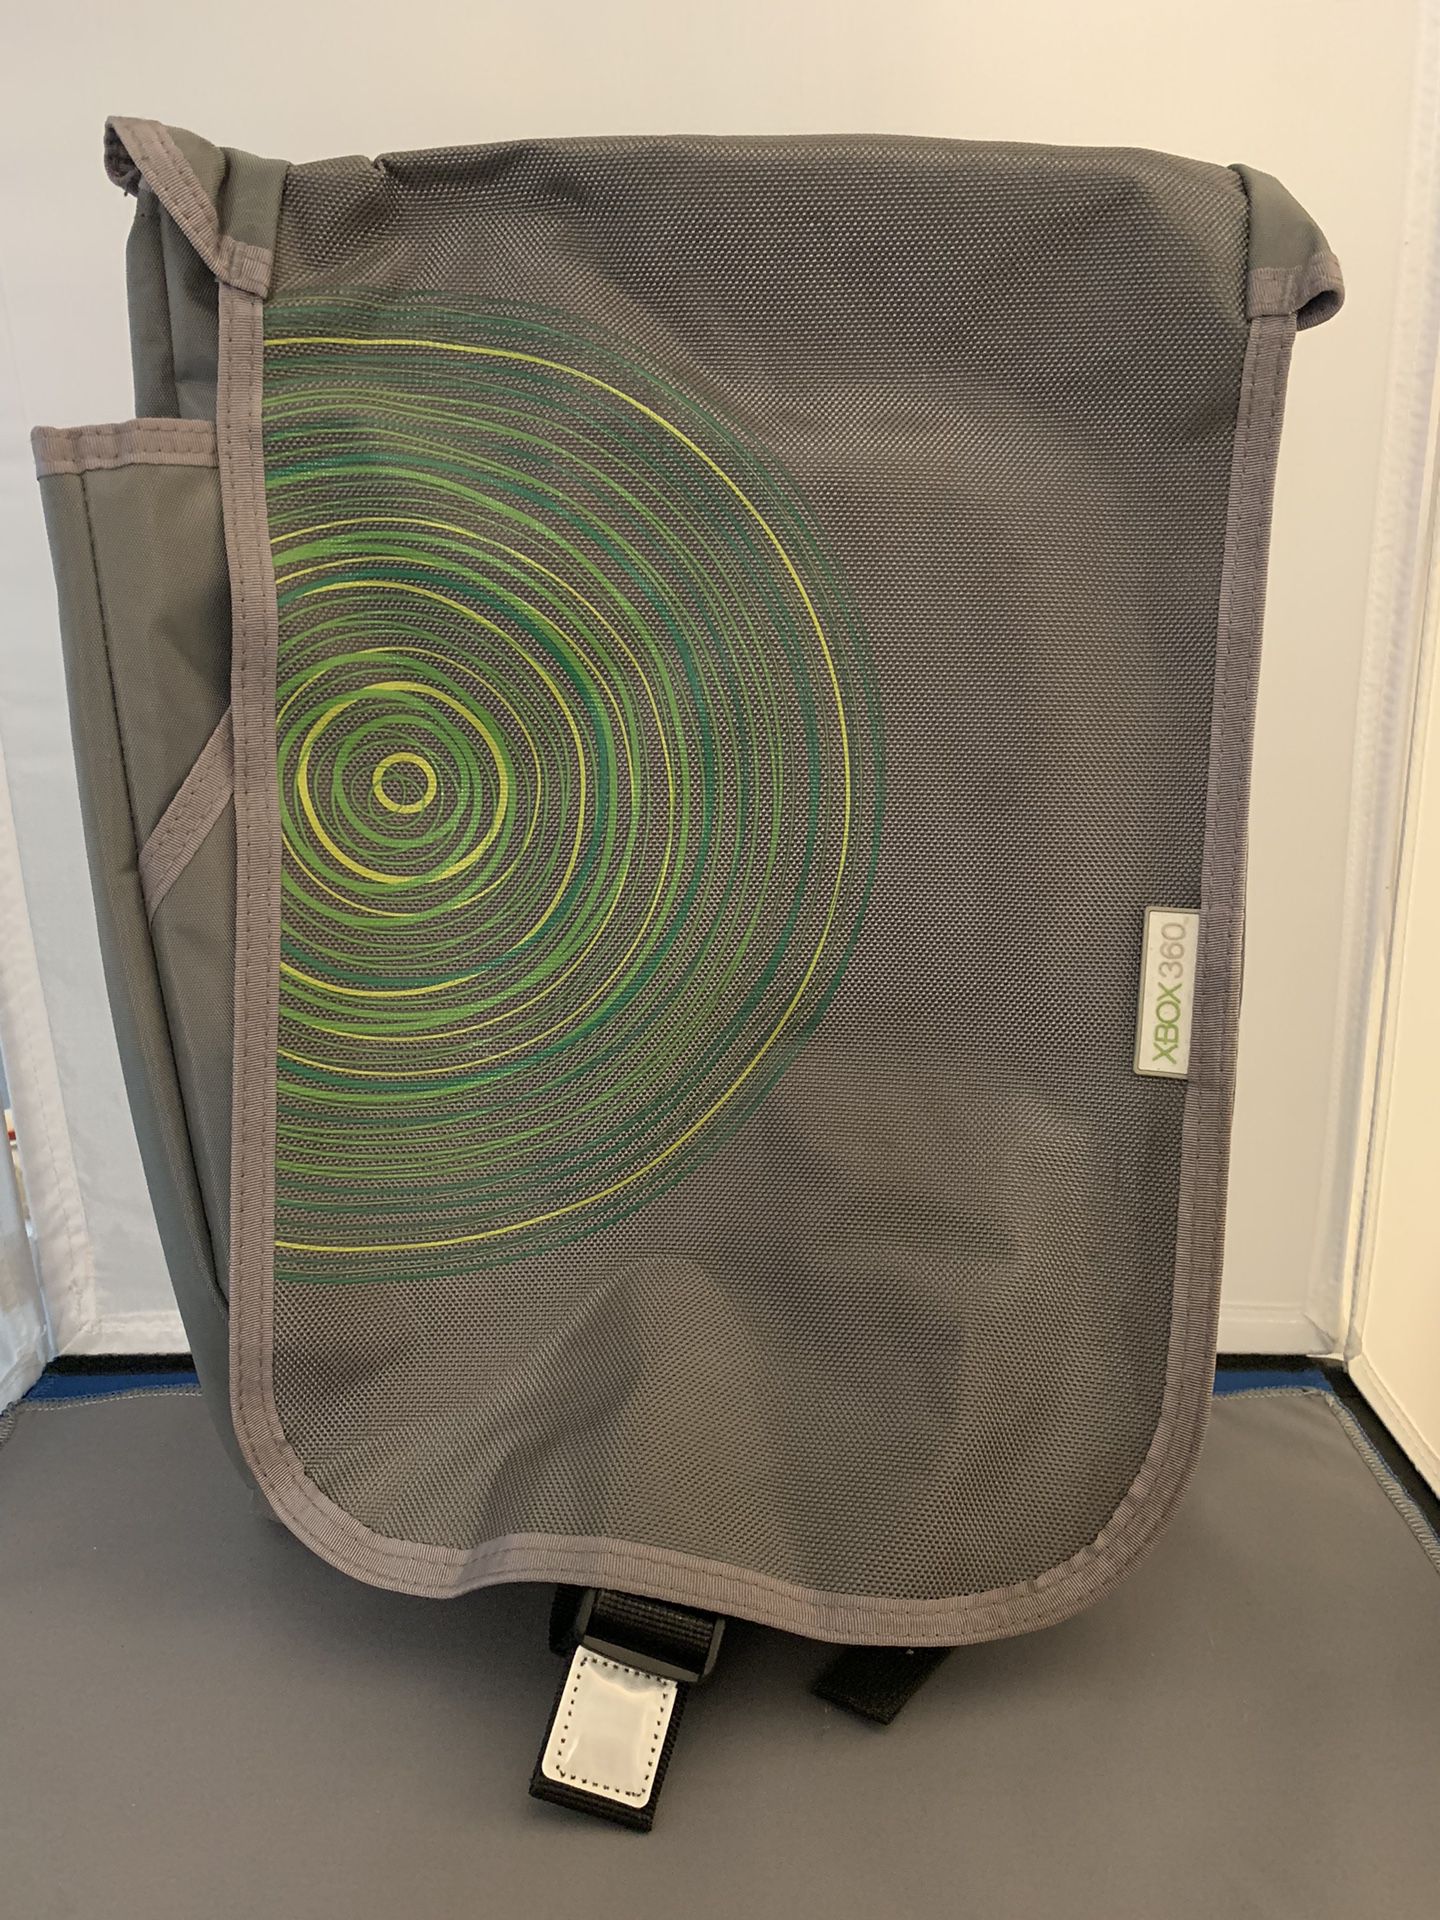 Xbox 360 Carrying Bag